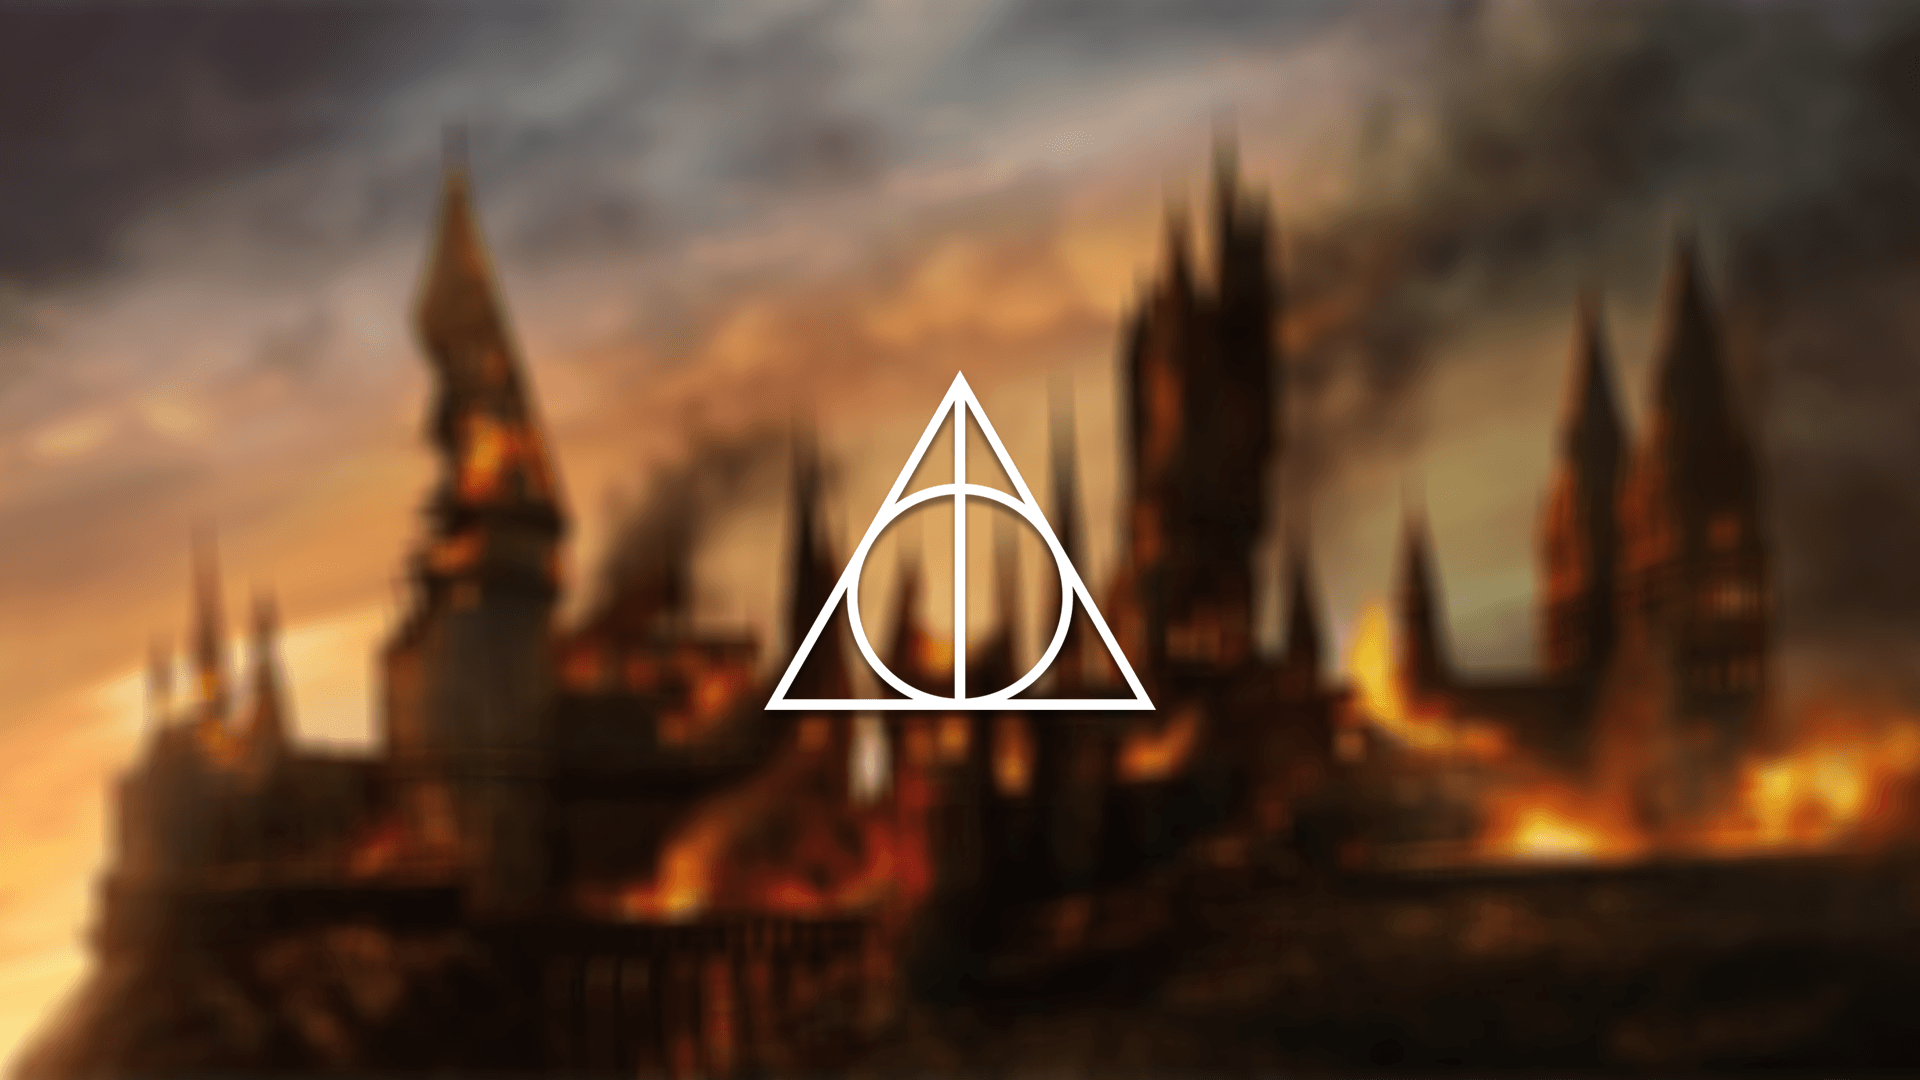 Harry Potter Hd Wallpapers For Laptop - Free HD Wallpapers